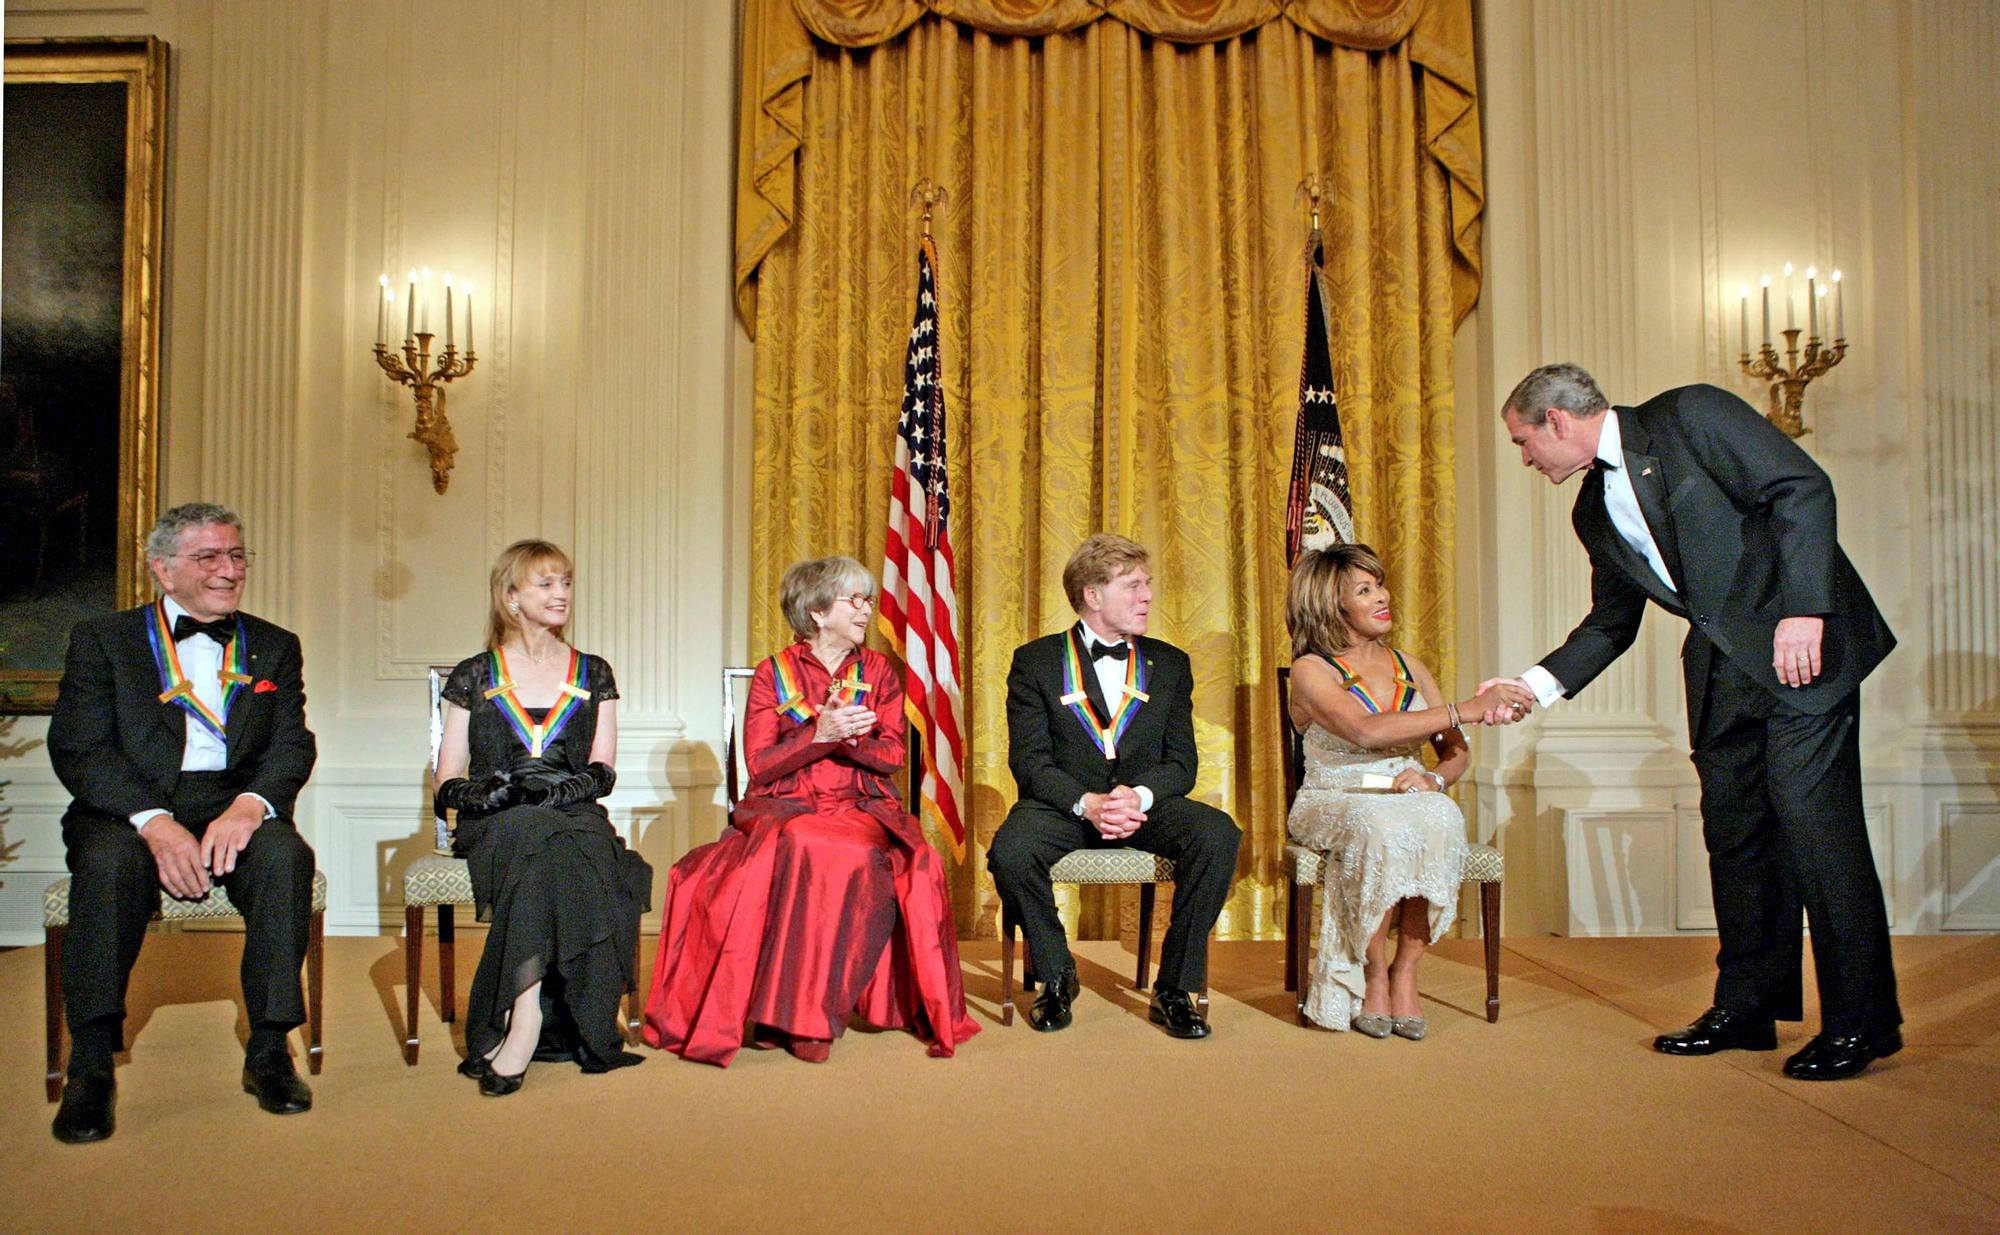 FILE PHOTO: U.S. President George W. Bush congratulates singer Tina Turner during a reception for the Kennedy Center Honors in the East Room of the White House in Washington